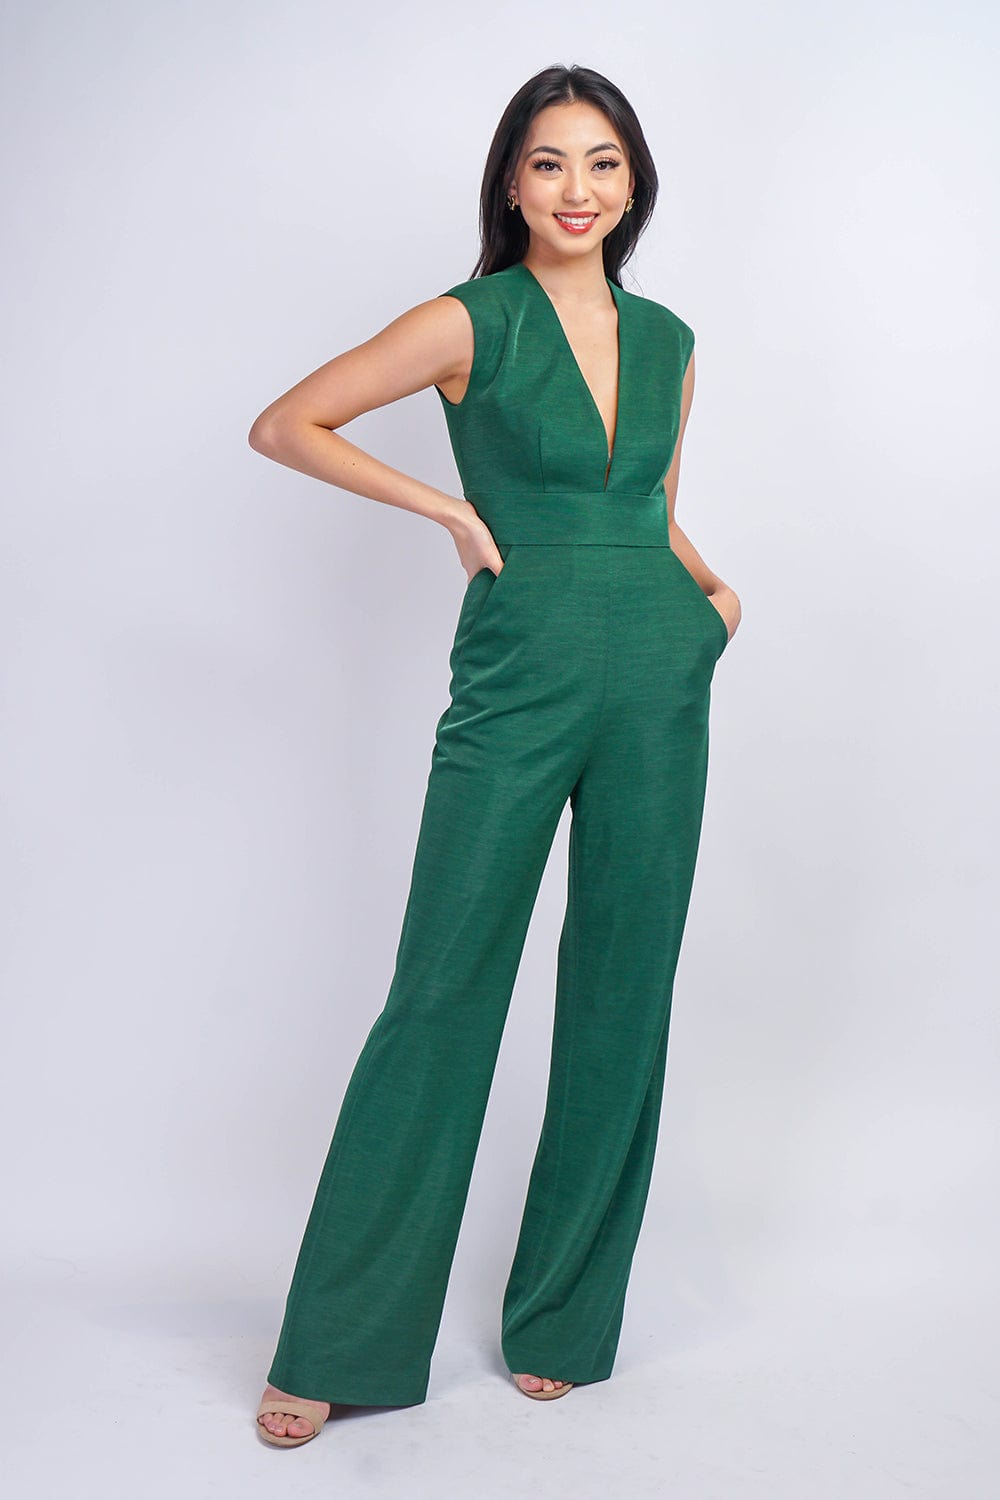 JUMPSUITS & ROMPERS Emerald Luxe Sheen V Neck Aiden Jumpsuit - Chloe Dao